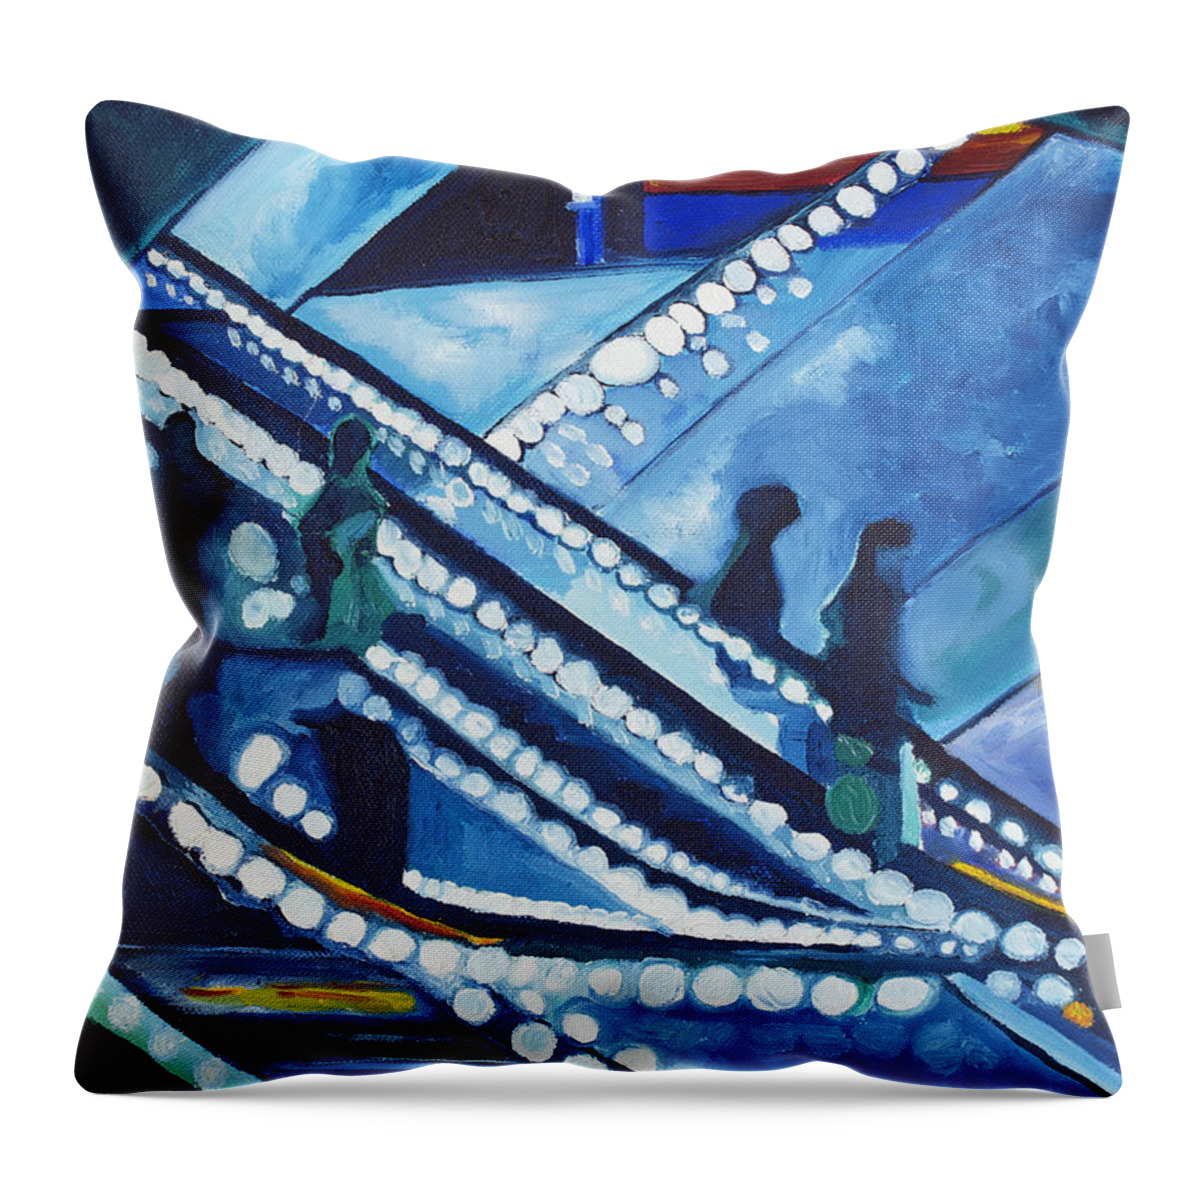 Night Scenes Throw Pillow featuring the painting Escalator Lights by Patricia Arroyo